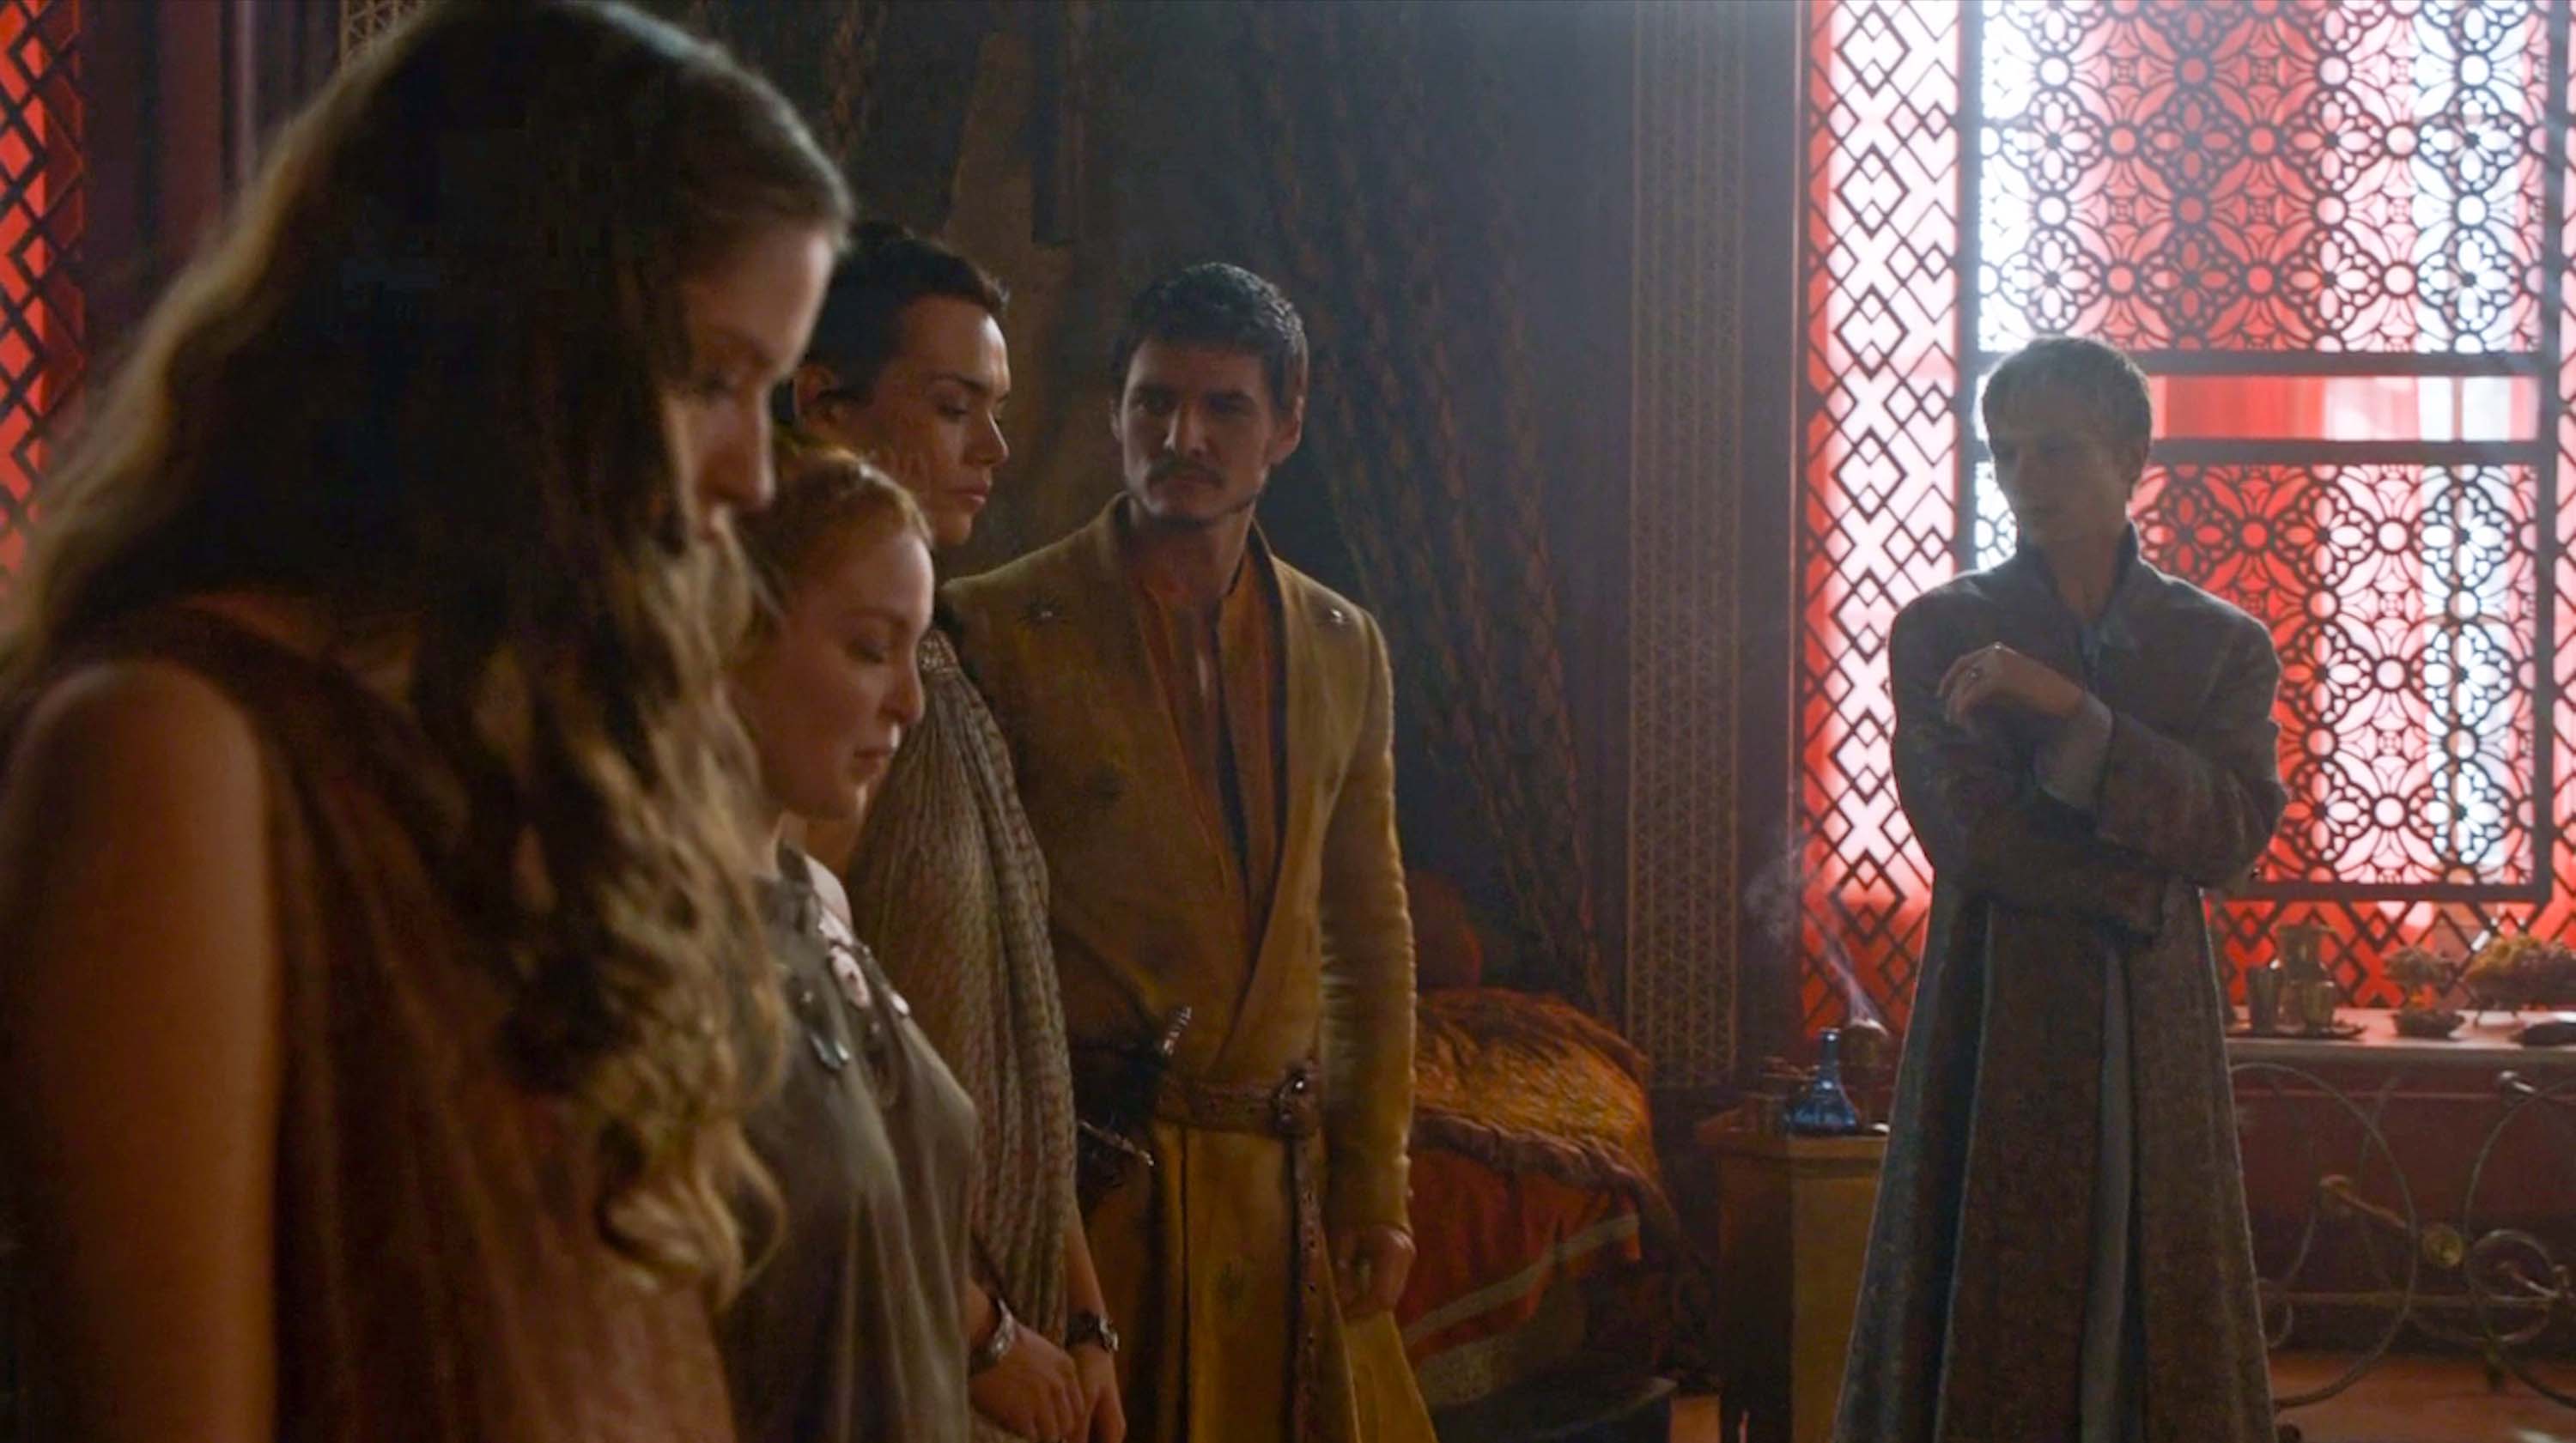 from right: Olyvar (Will Tudor) shows Prince Oberyn (Pedro Pascal) their se...